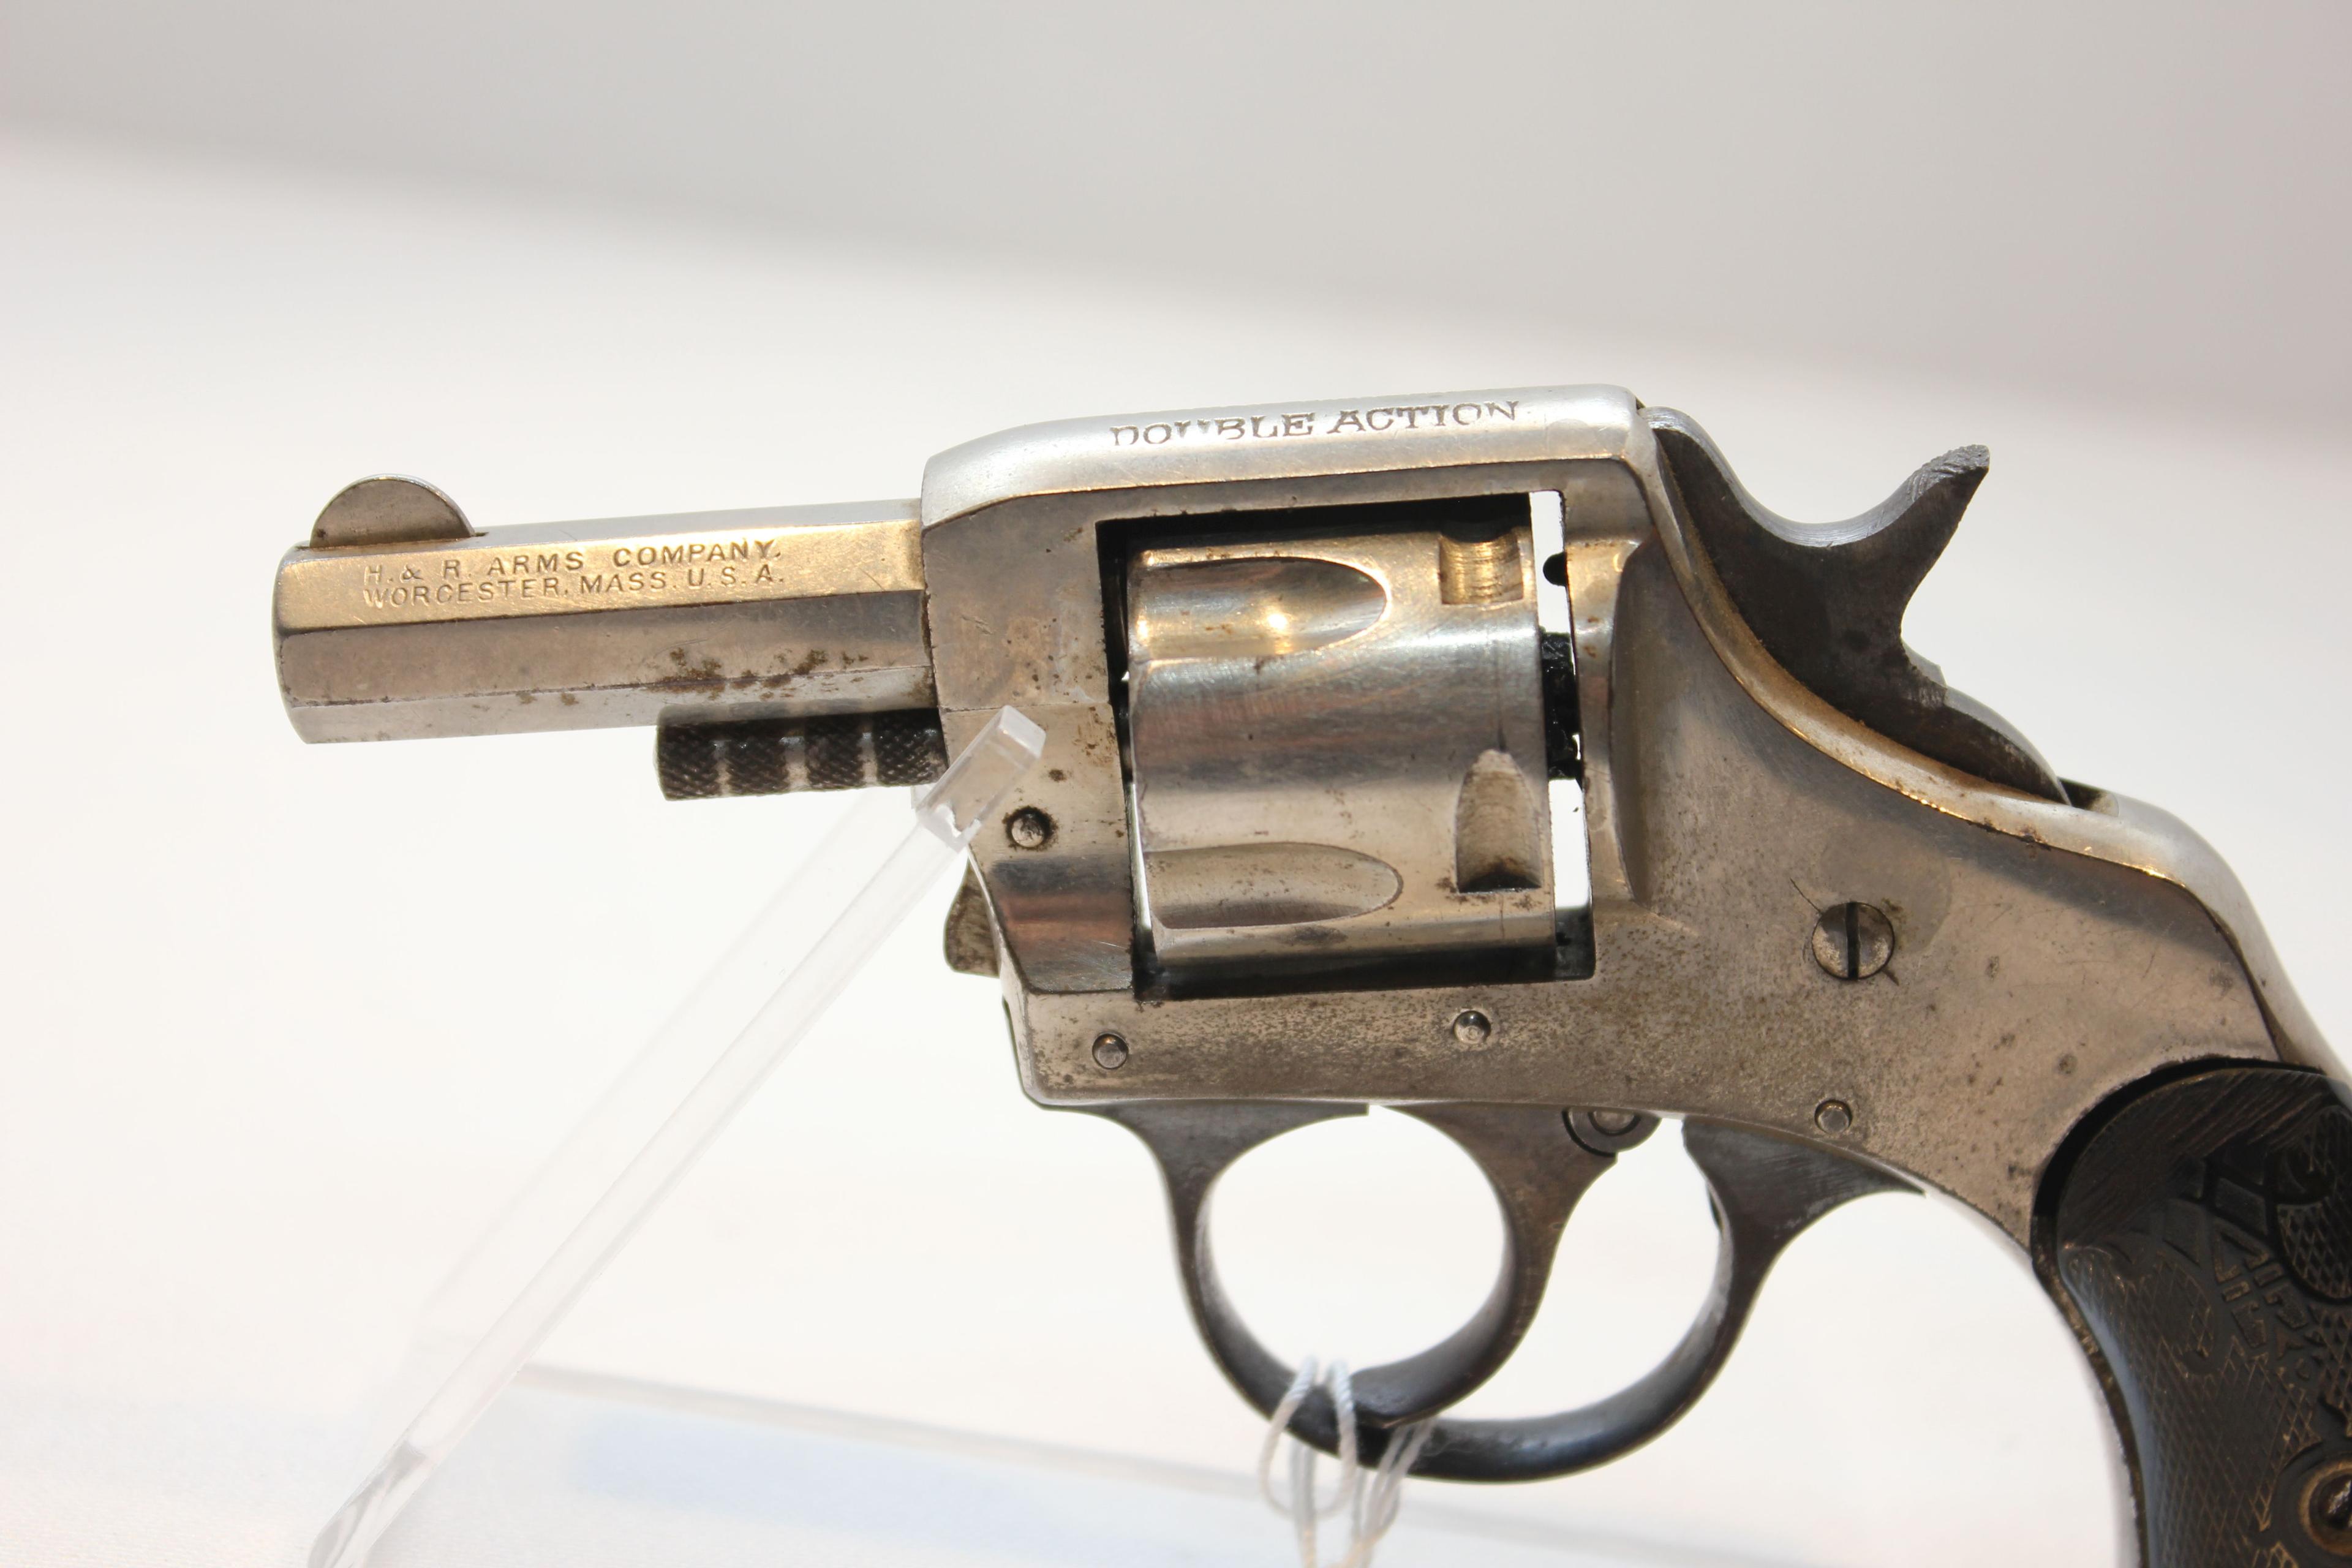 H&R Arms Co. Young America .32 Cal. 5-Shot Double Action Revolver Second Model w/2" Octagon BBL and